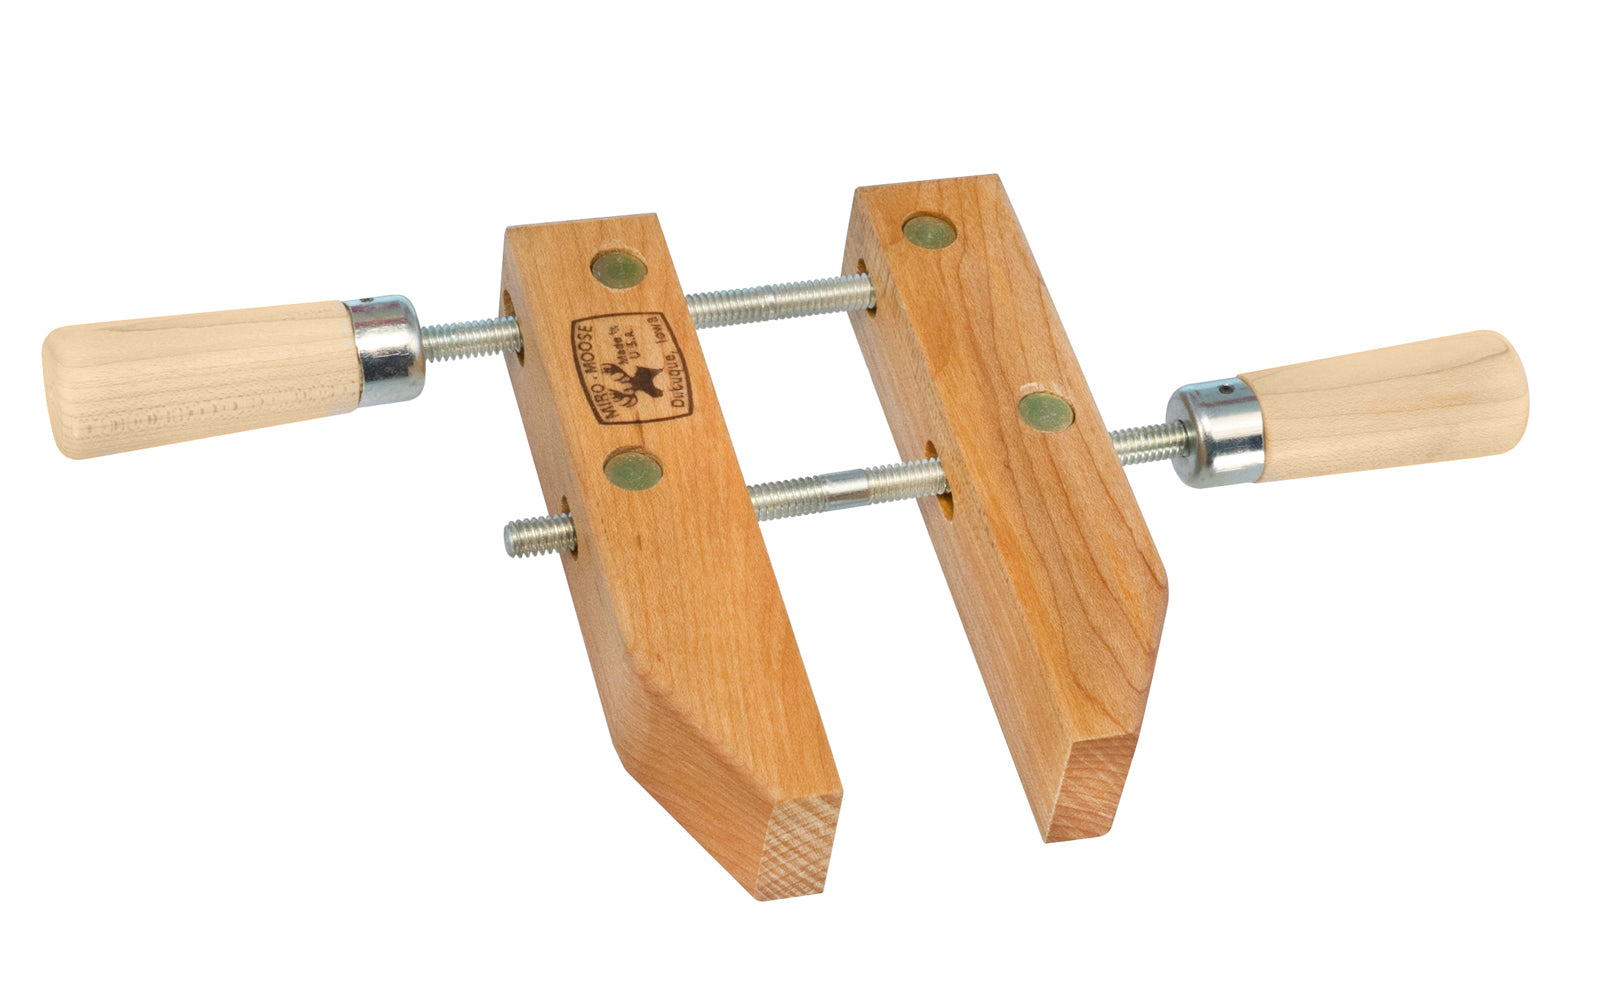 2-1/2" Opening Capacity - 5" Jaw Length - Fine quality hard maple jaws apply even pressure to a broad area. Bench clamp for gluing & assembly work. Spindles & swivel nuts are made of cold drawn carbon steel. Threads have double leads for rapid operation & close tolerances for extra wear. Made in USA. 099687000052